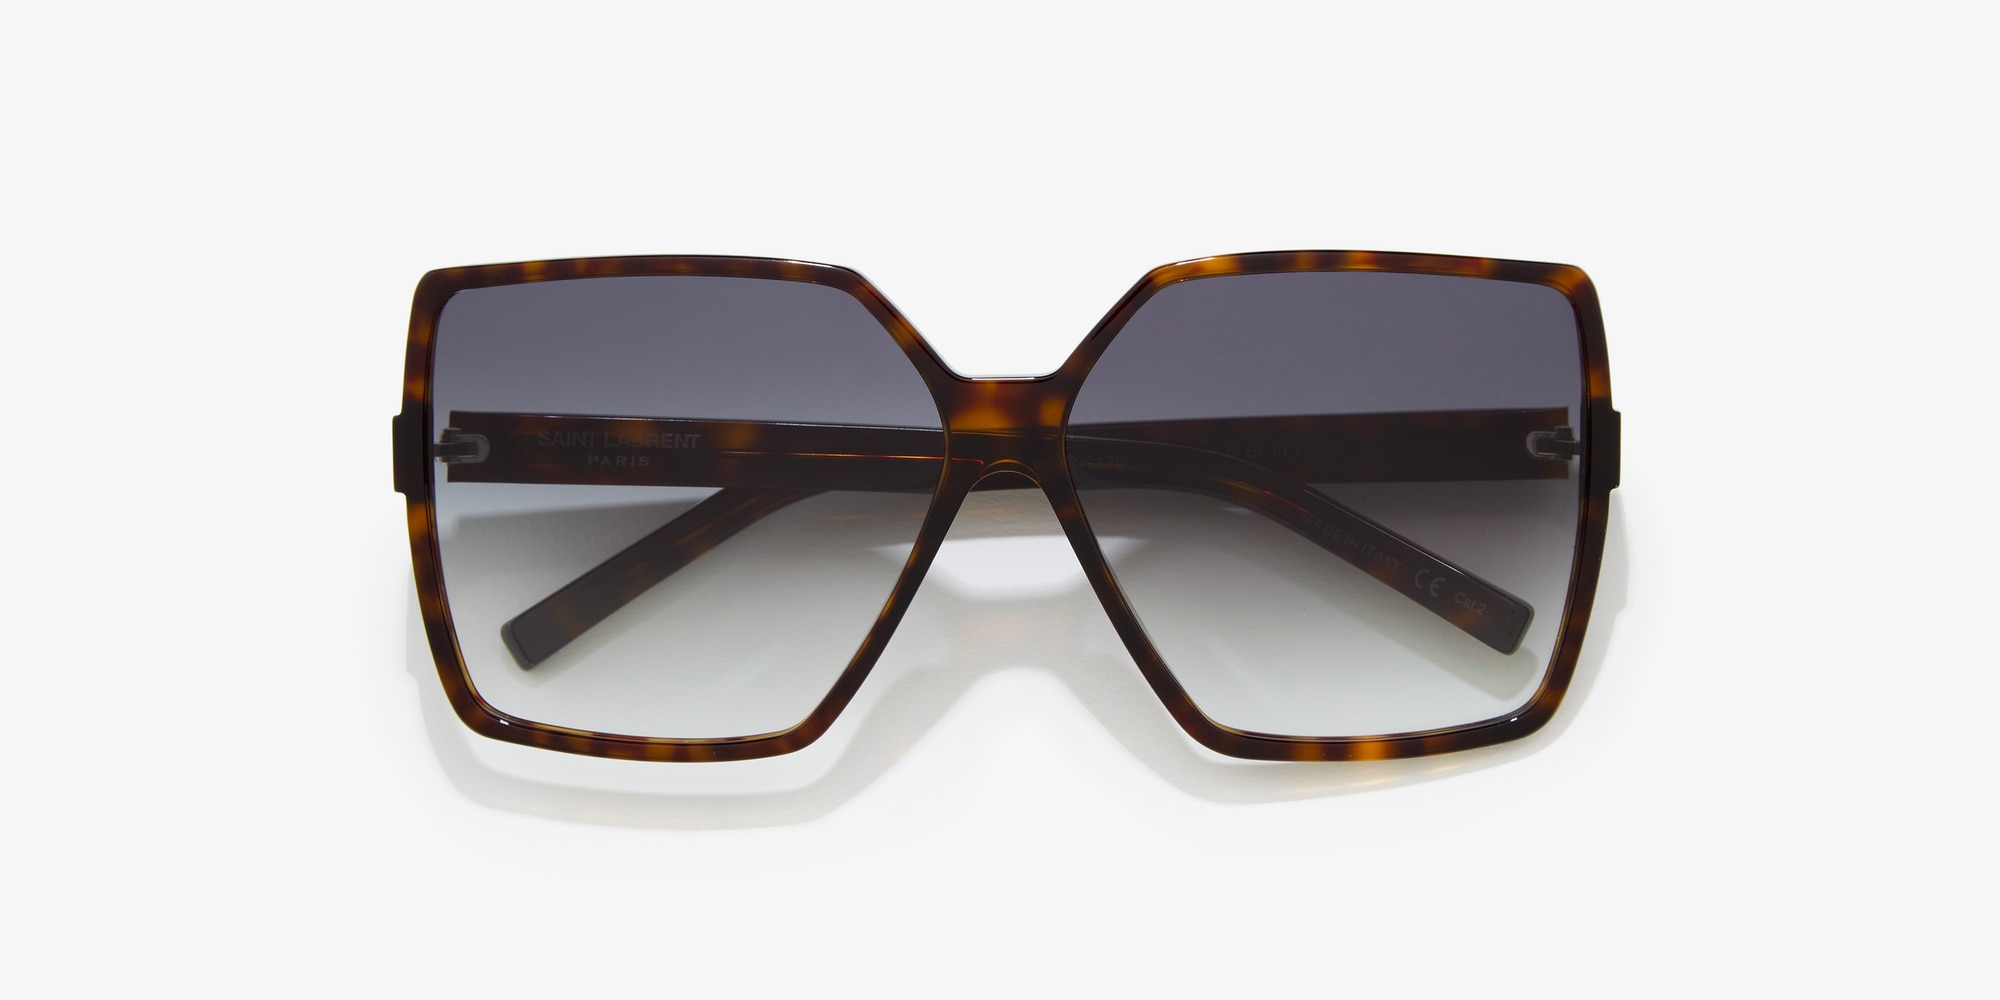 Aggregate more than 139 ysl betty sunglasses 232 best